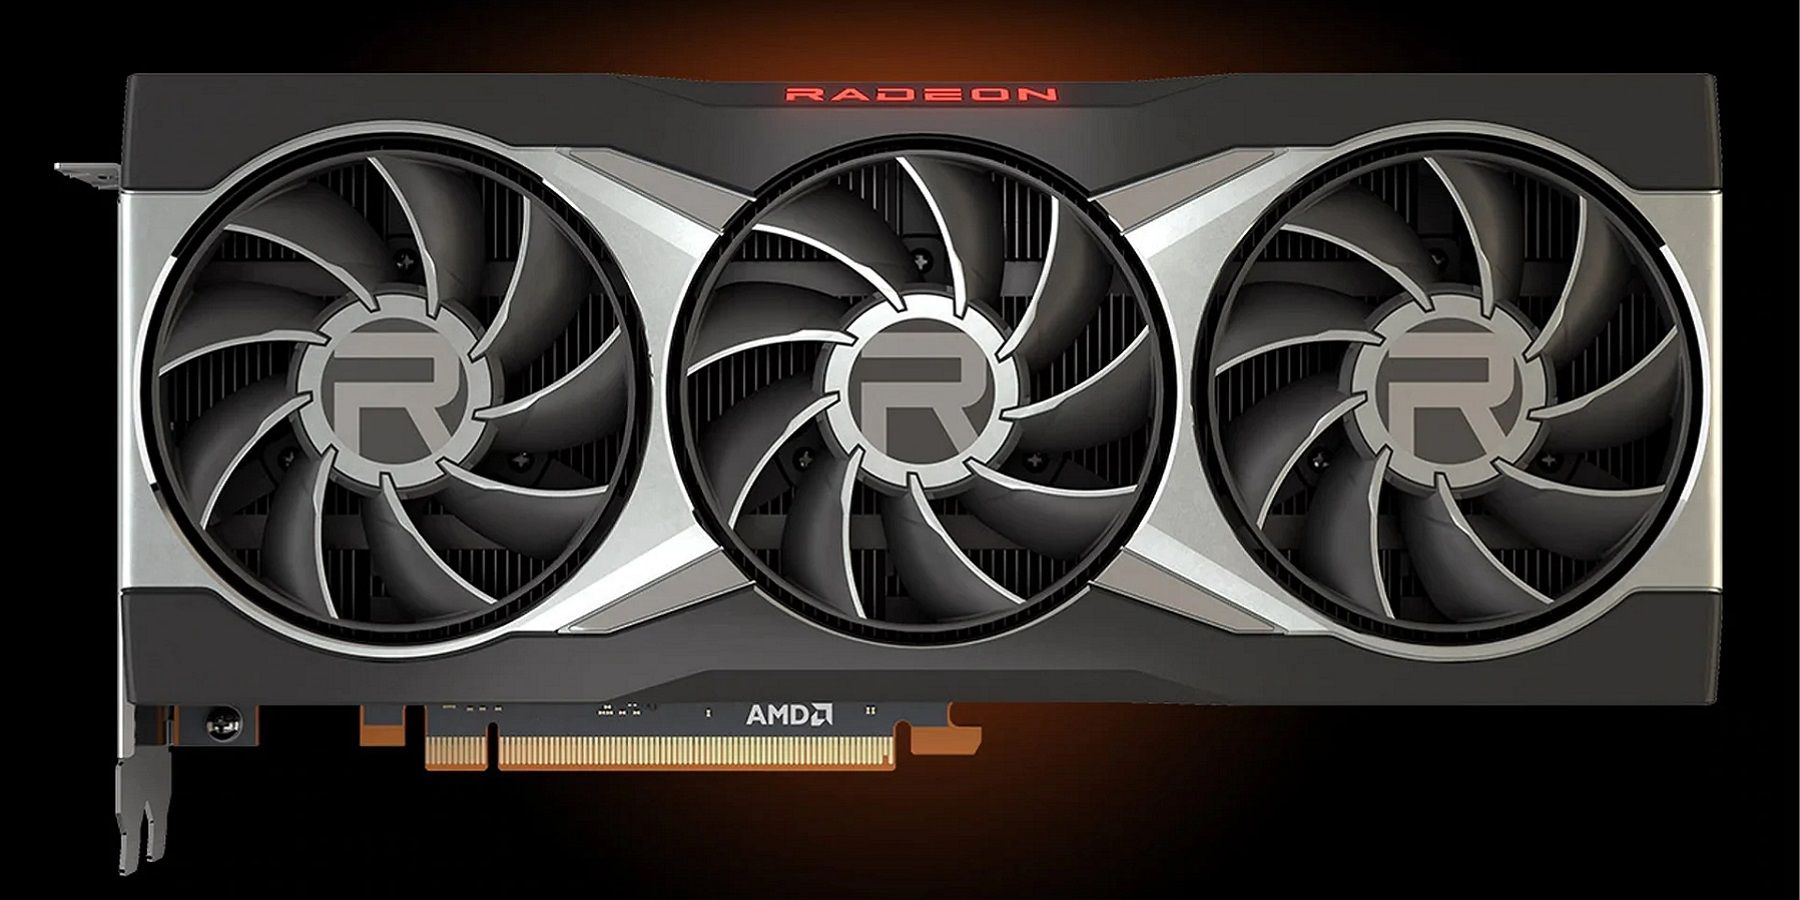 Image of the front of an AMD Radeon graphics card.